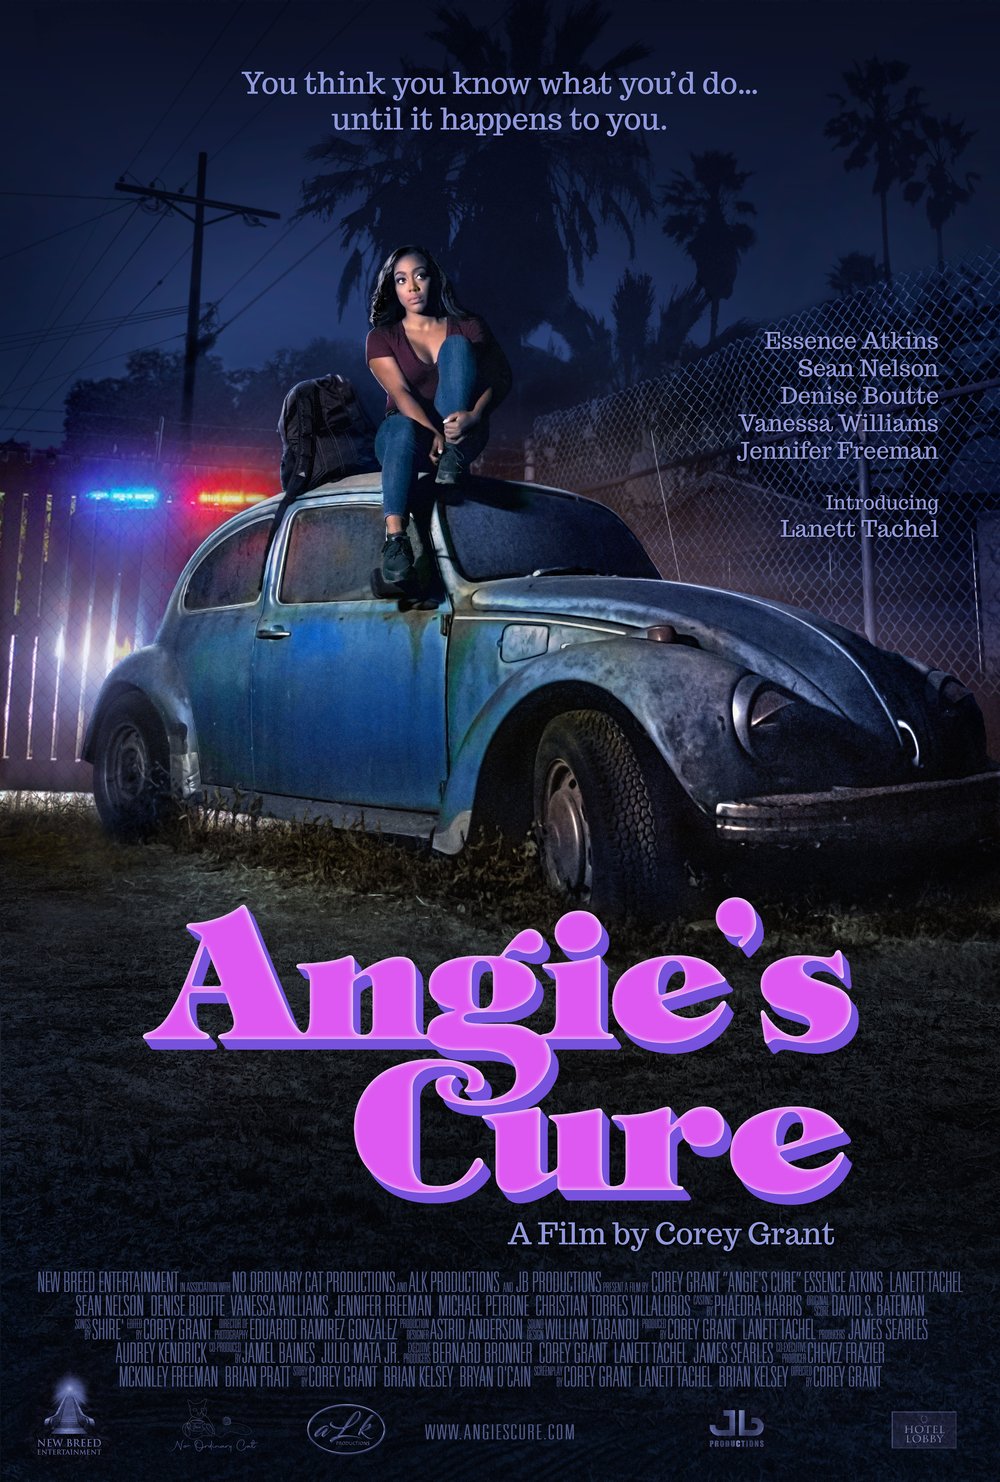 New Film Angie’s Cure Screened At The Director’s Guild Of America